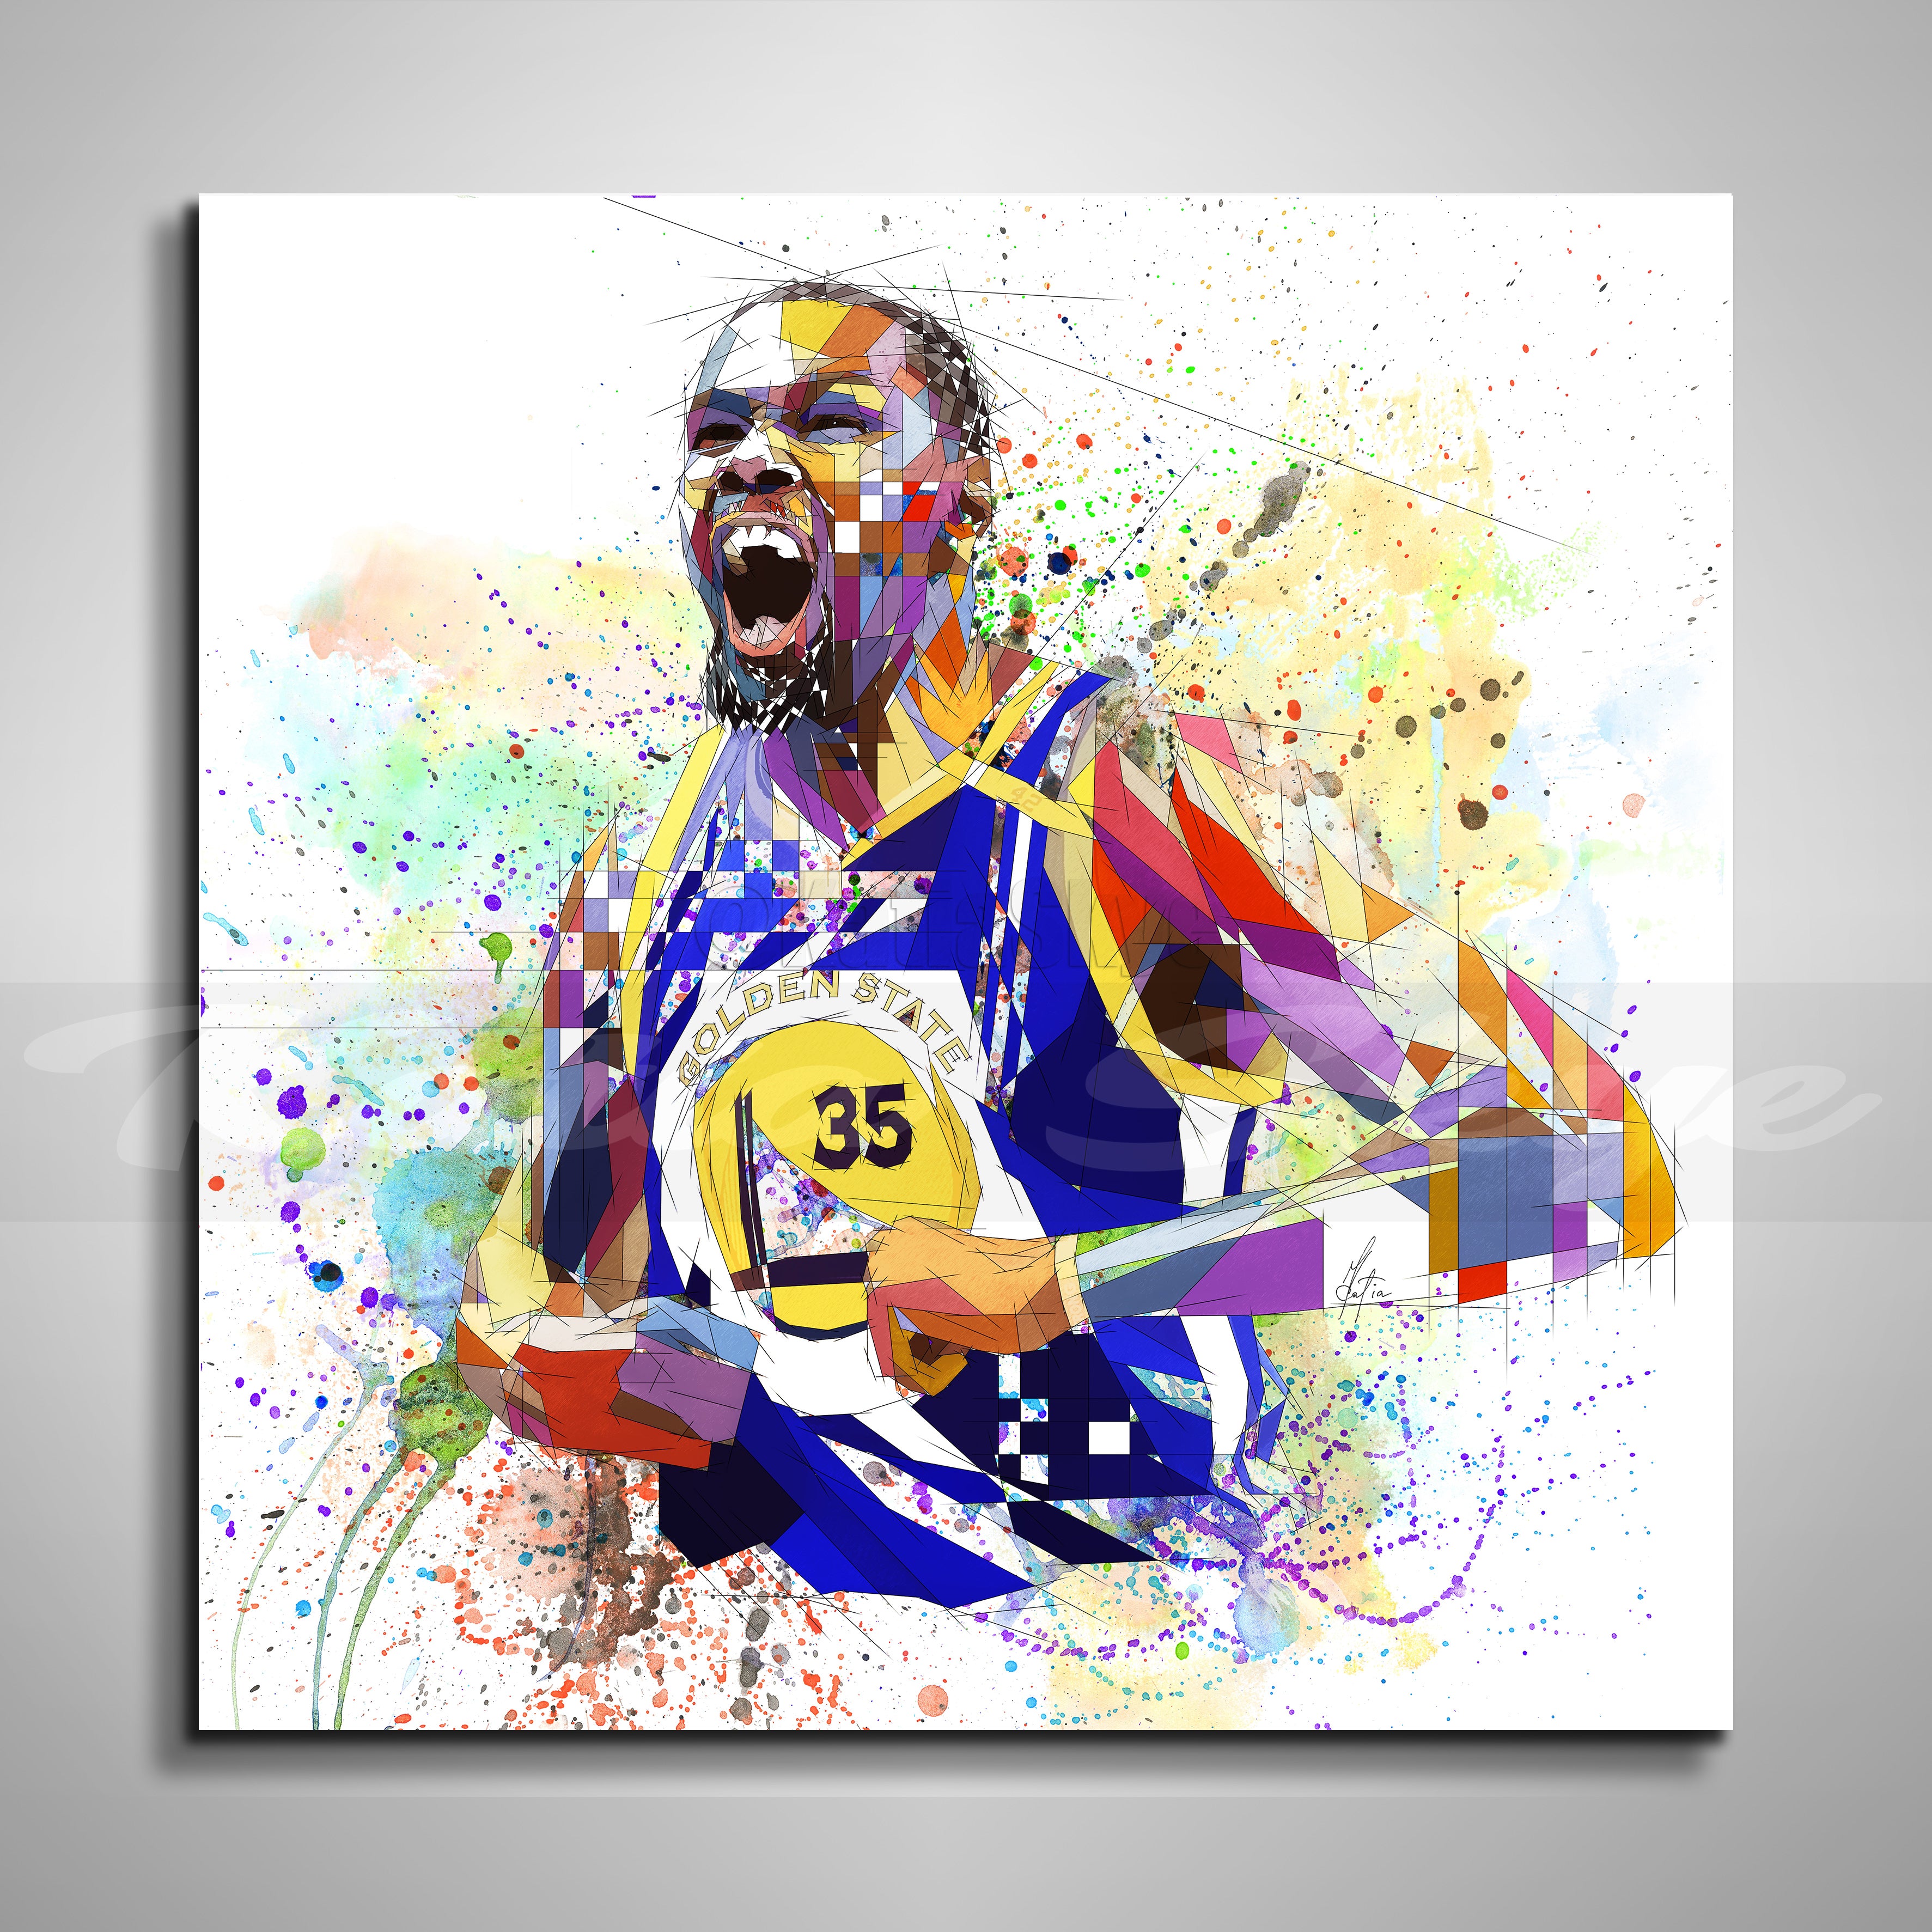 Canvas Print of your Favorite Athlete